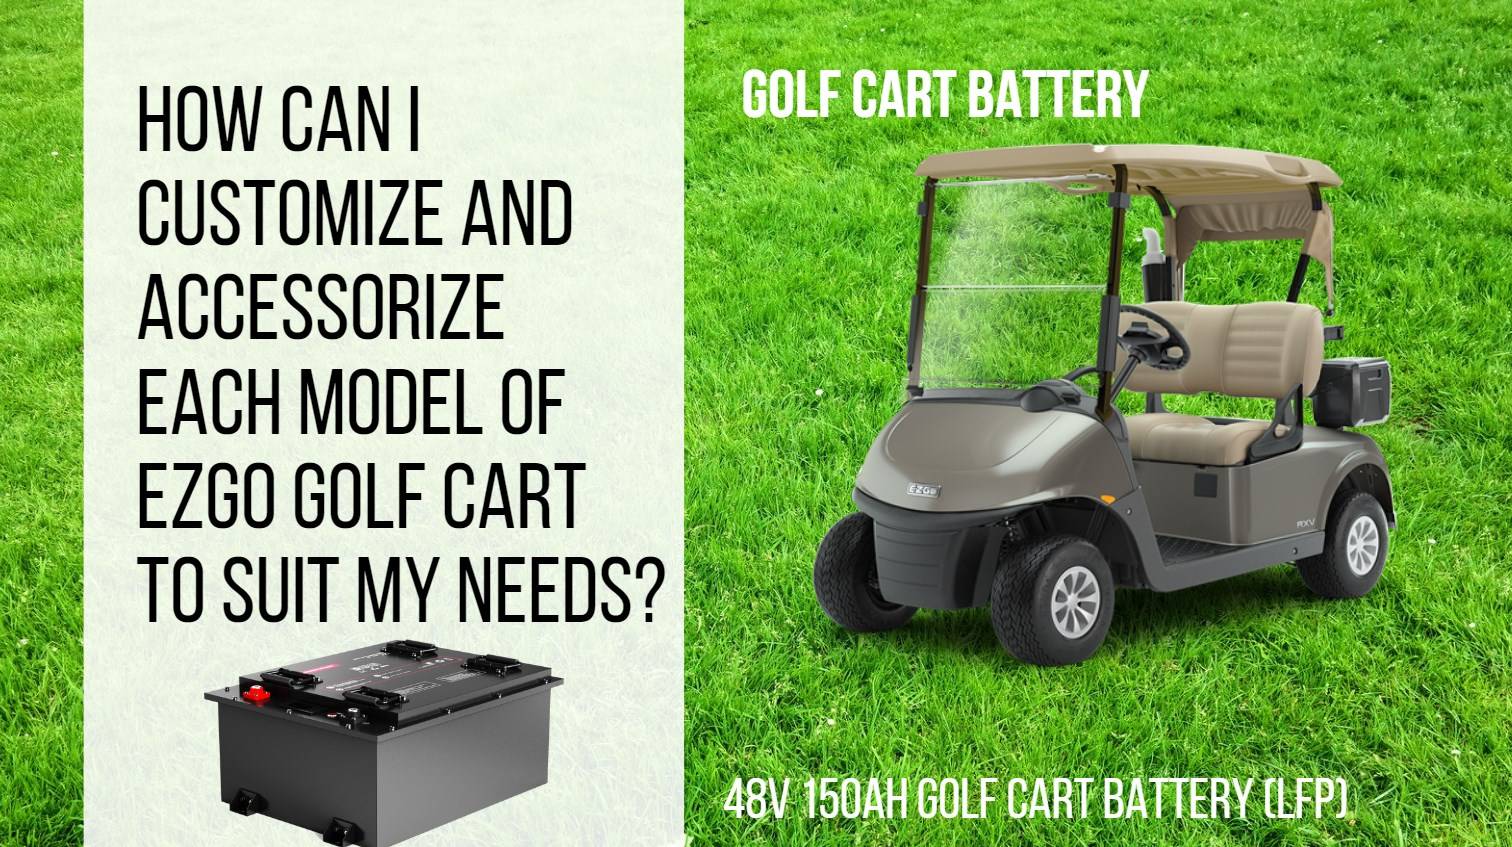 How can I customize and accessorize each model of EZGO golf cart to suit my needs? Different Models and Features of EZGO Golf Carts. 48v 150ah golf cart battery lfp redway